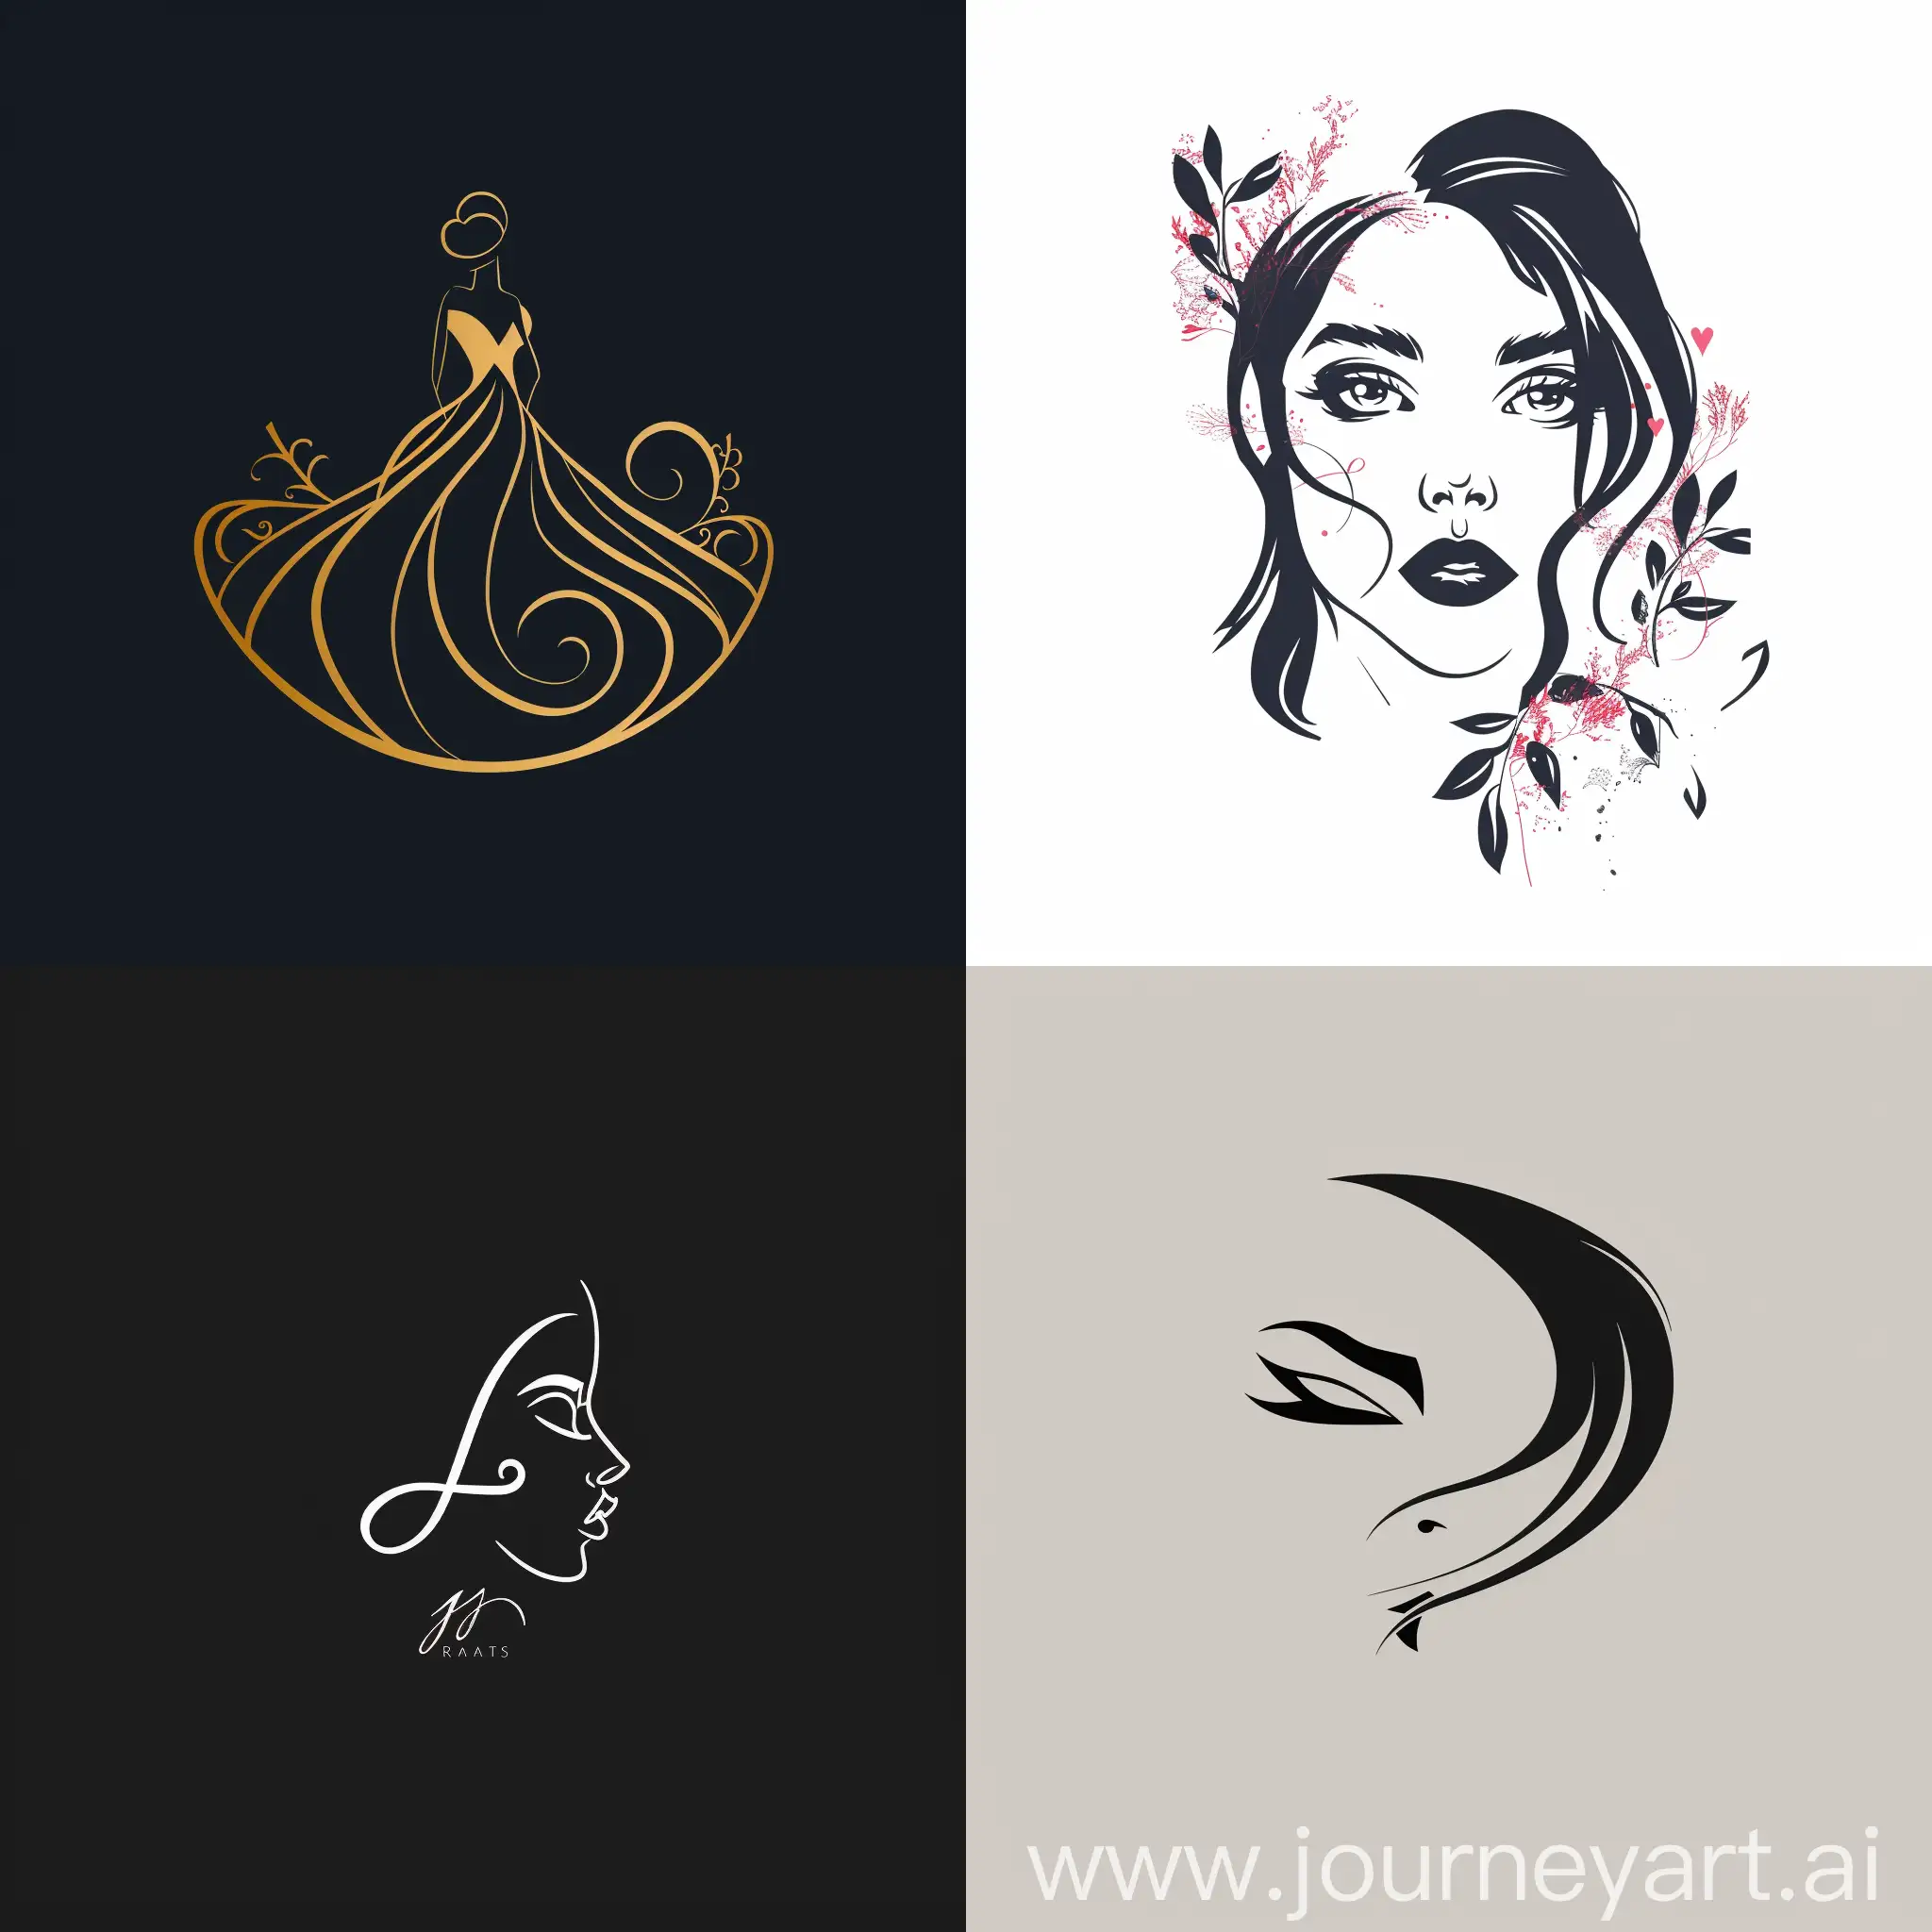 /imagine please design a logo for my fashion and lifestyle website